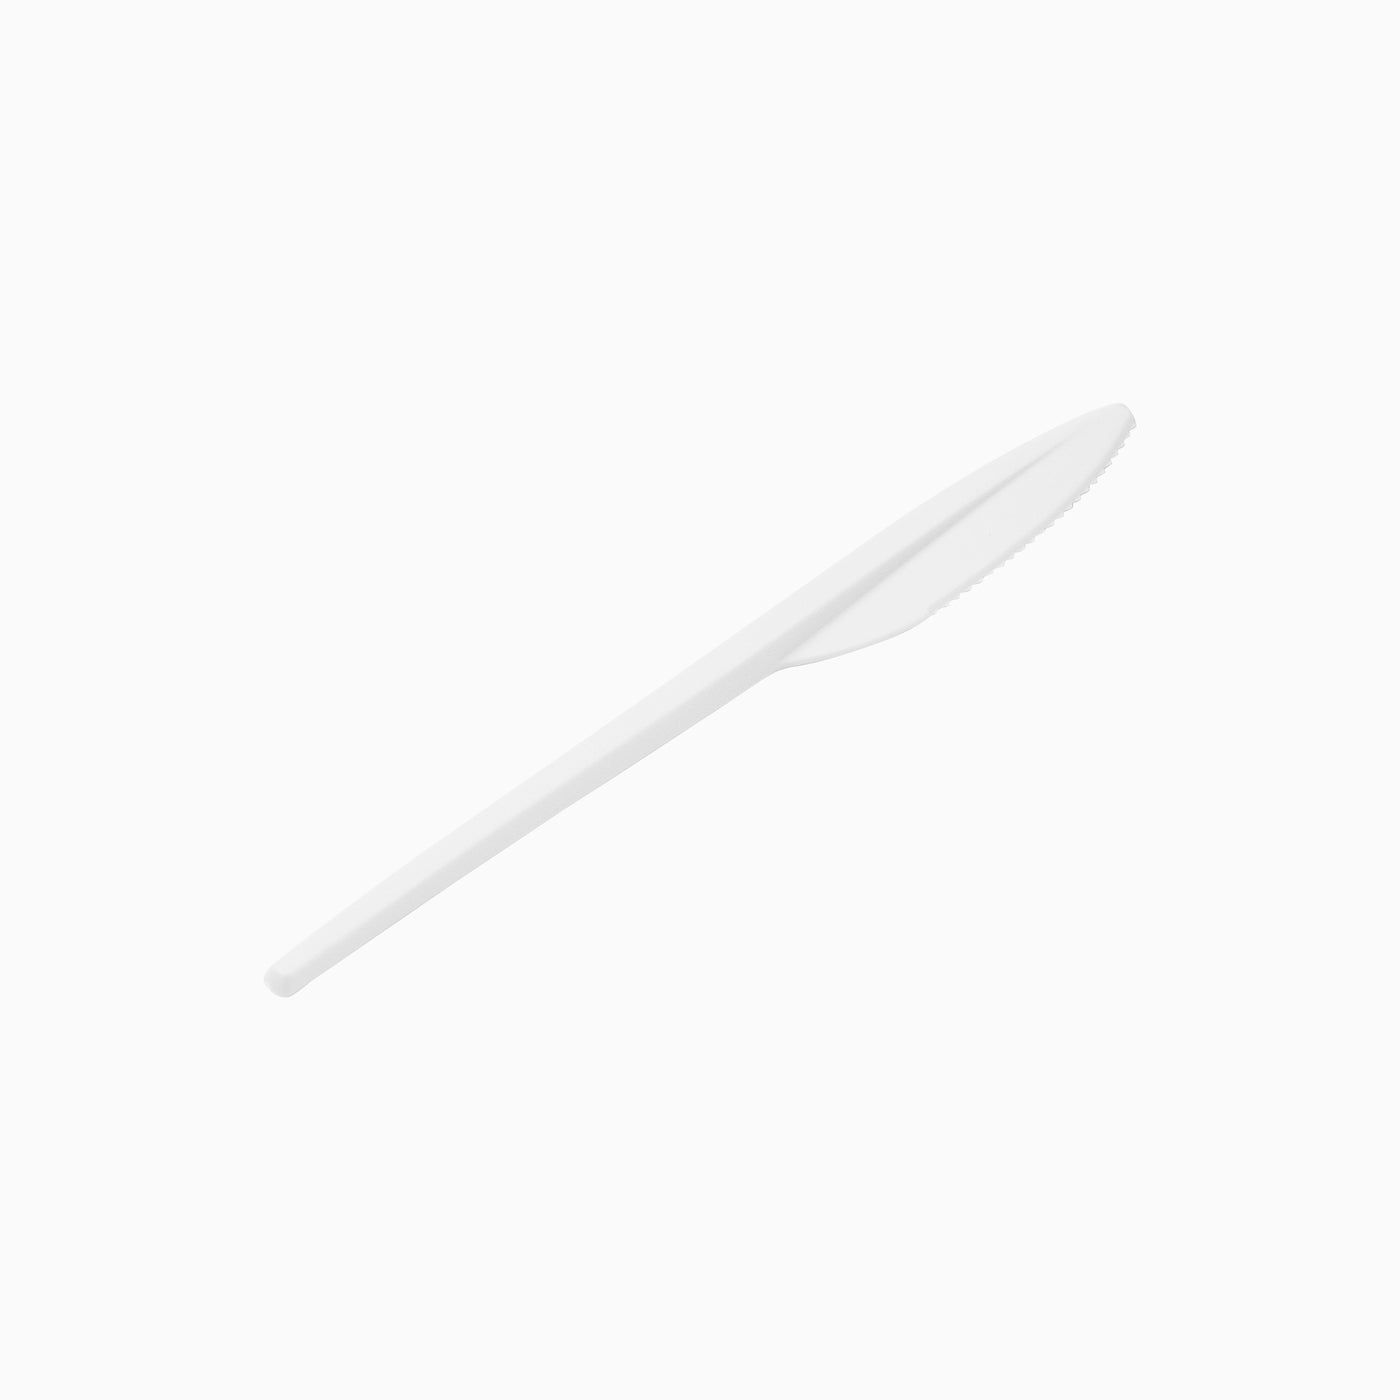 White compositional cup knife